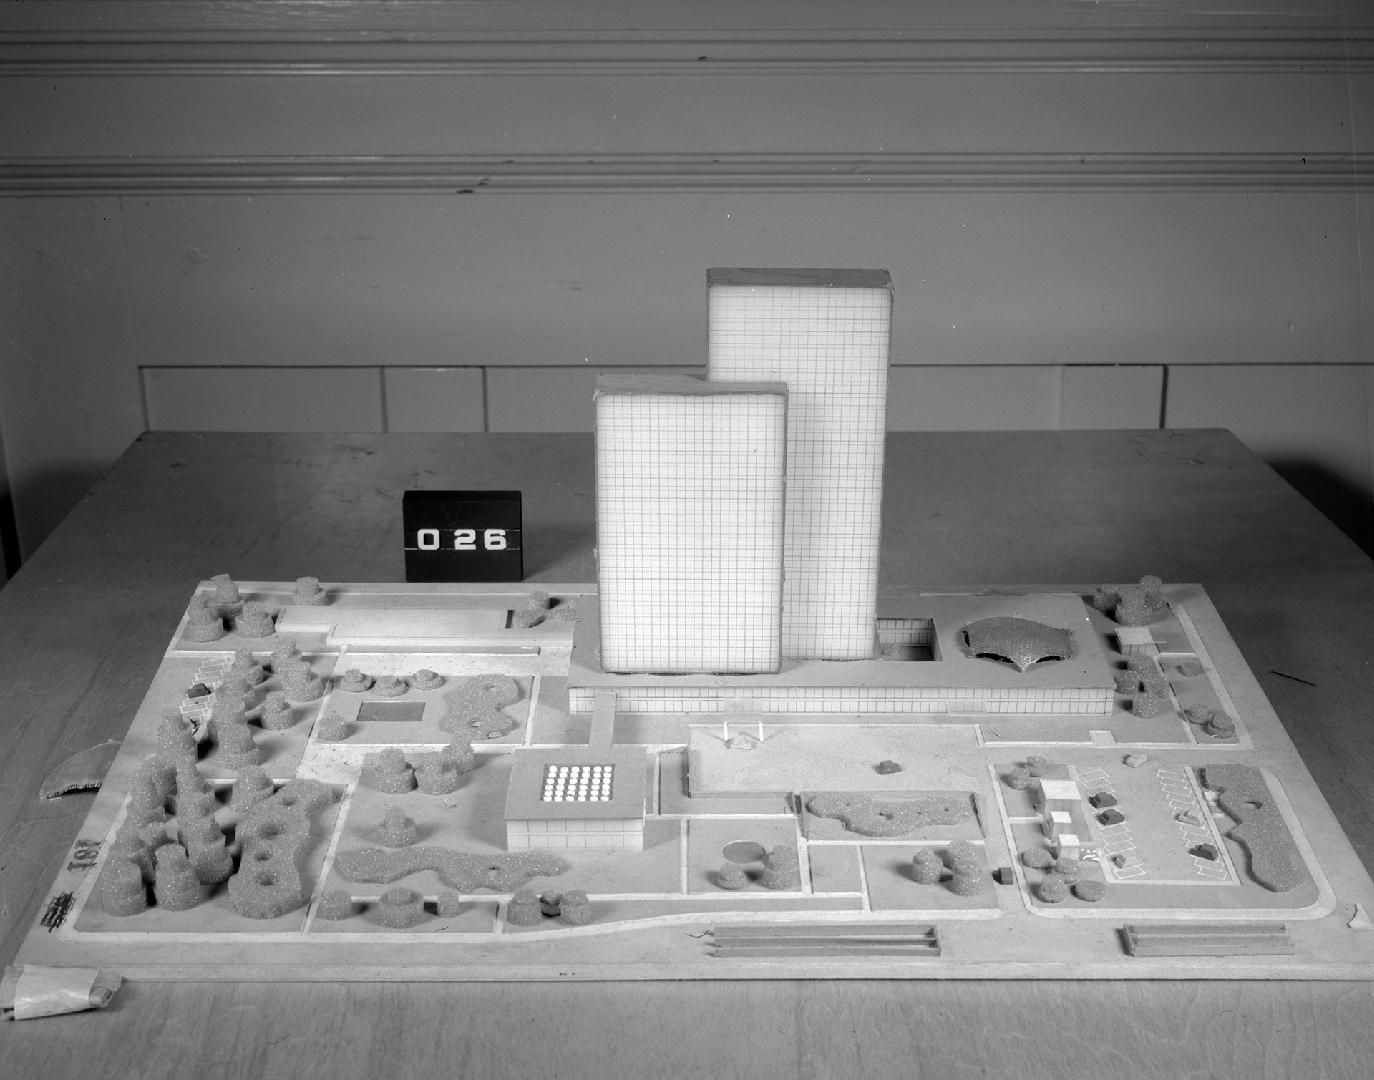 Herbert West List entry, City Hall and Square Competition, Toronto, 1958, architectural model